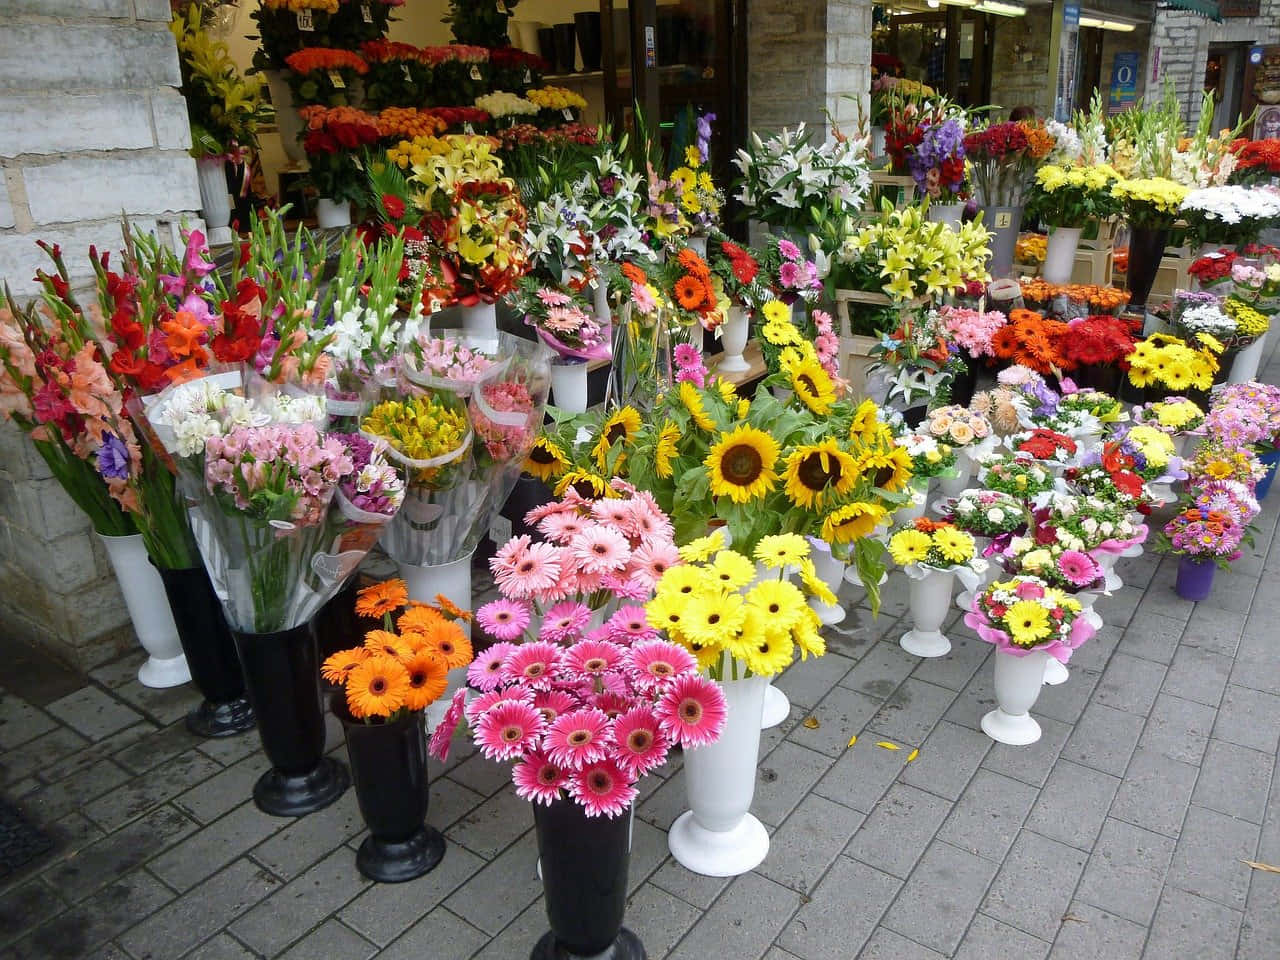 Beautiful florist shop filled with vibrant colors of flowers. Wallpaper